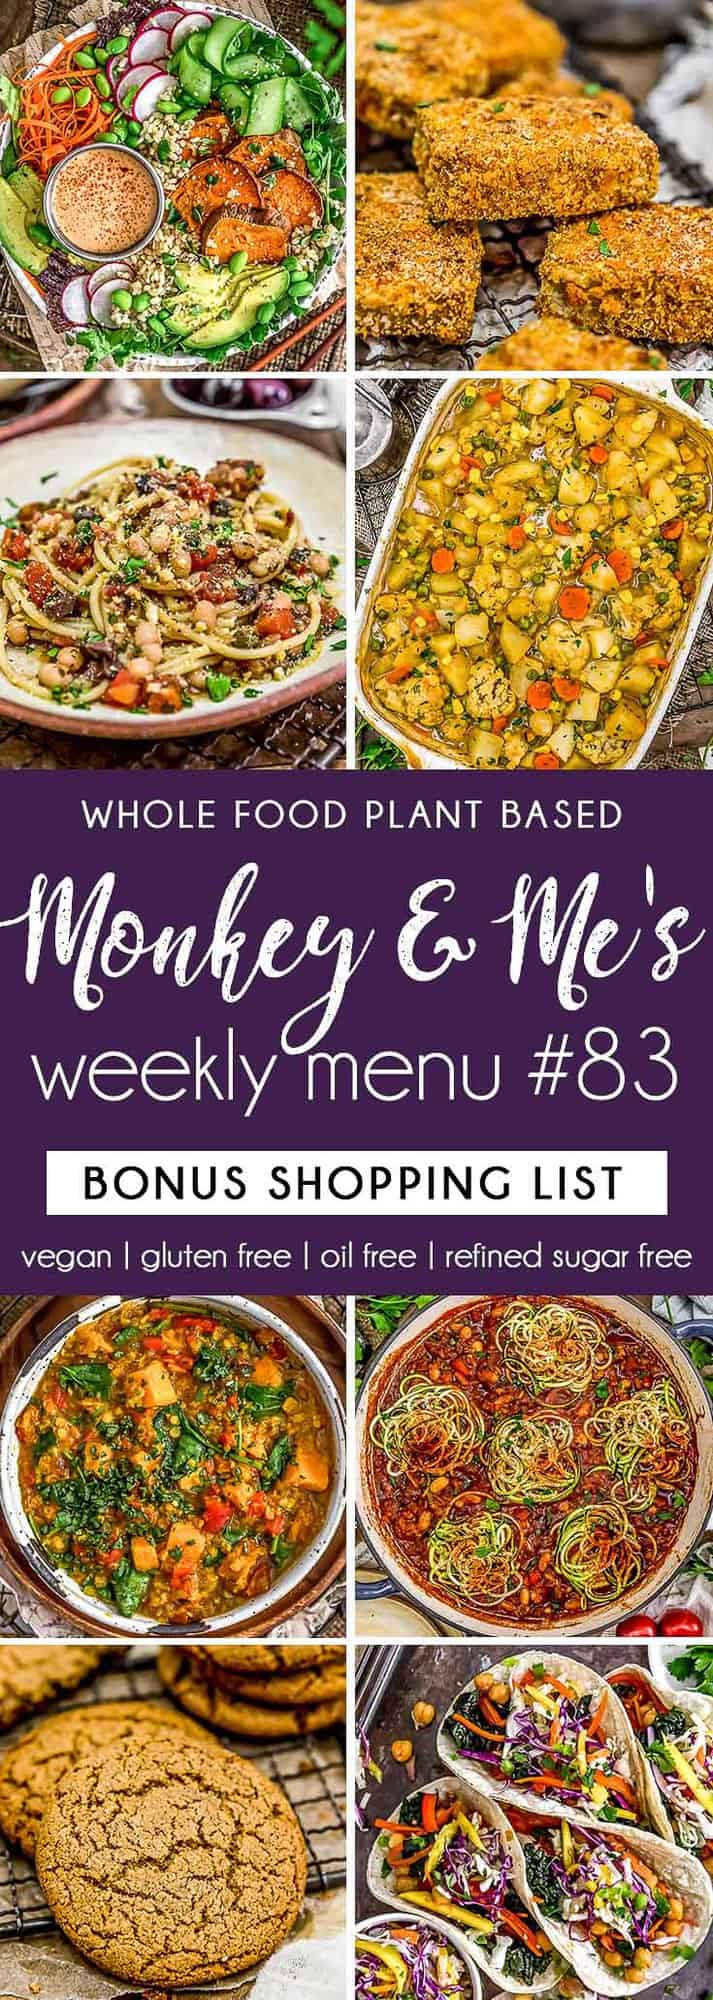 Monkey and Me's Menu 83 featuring 8 recipes